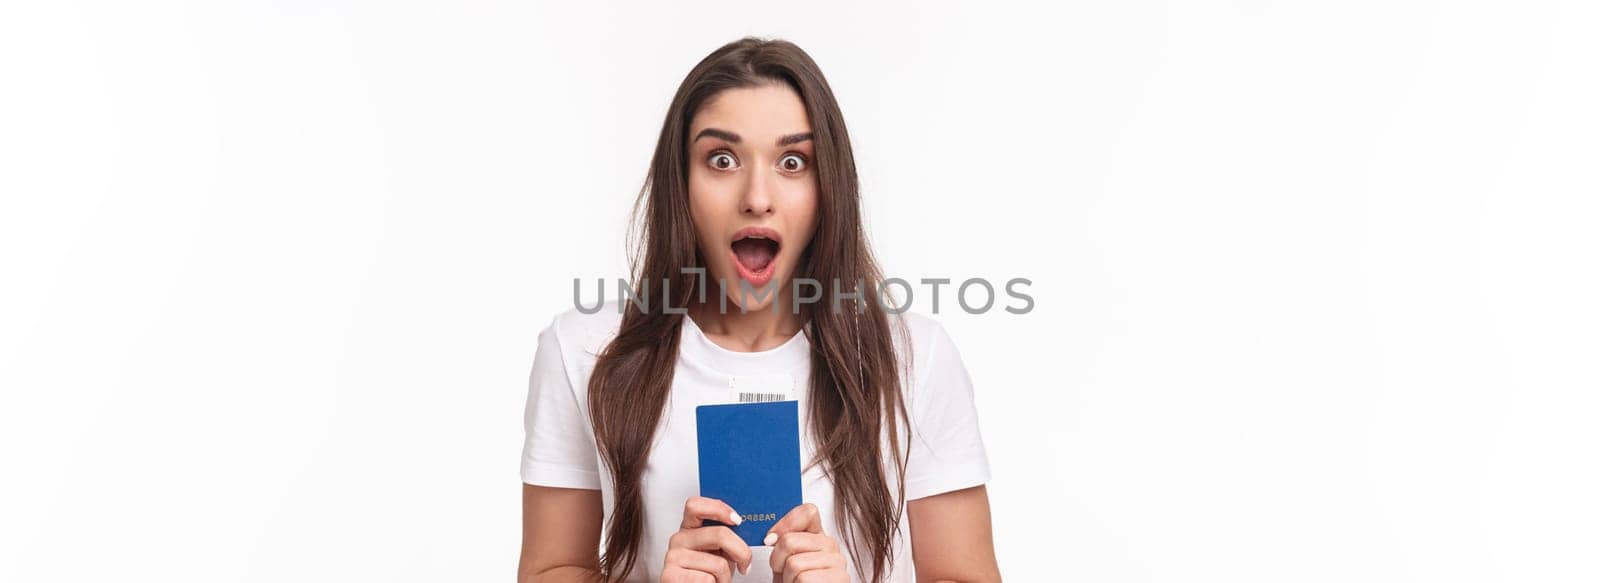 Travelling, holidays, summer concept. Close-up portrait of impressed, shocked young woman holding passport, drop jaw and staring astonished at camera, ready to travel, moving abroad.